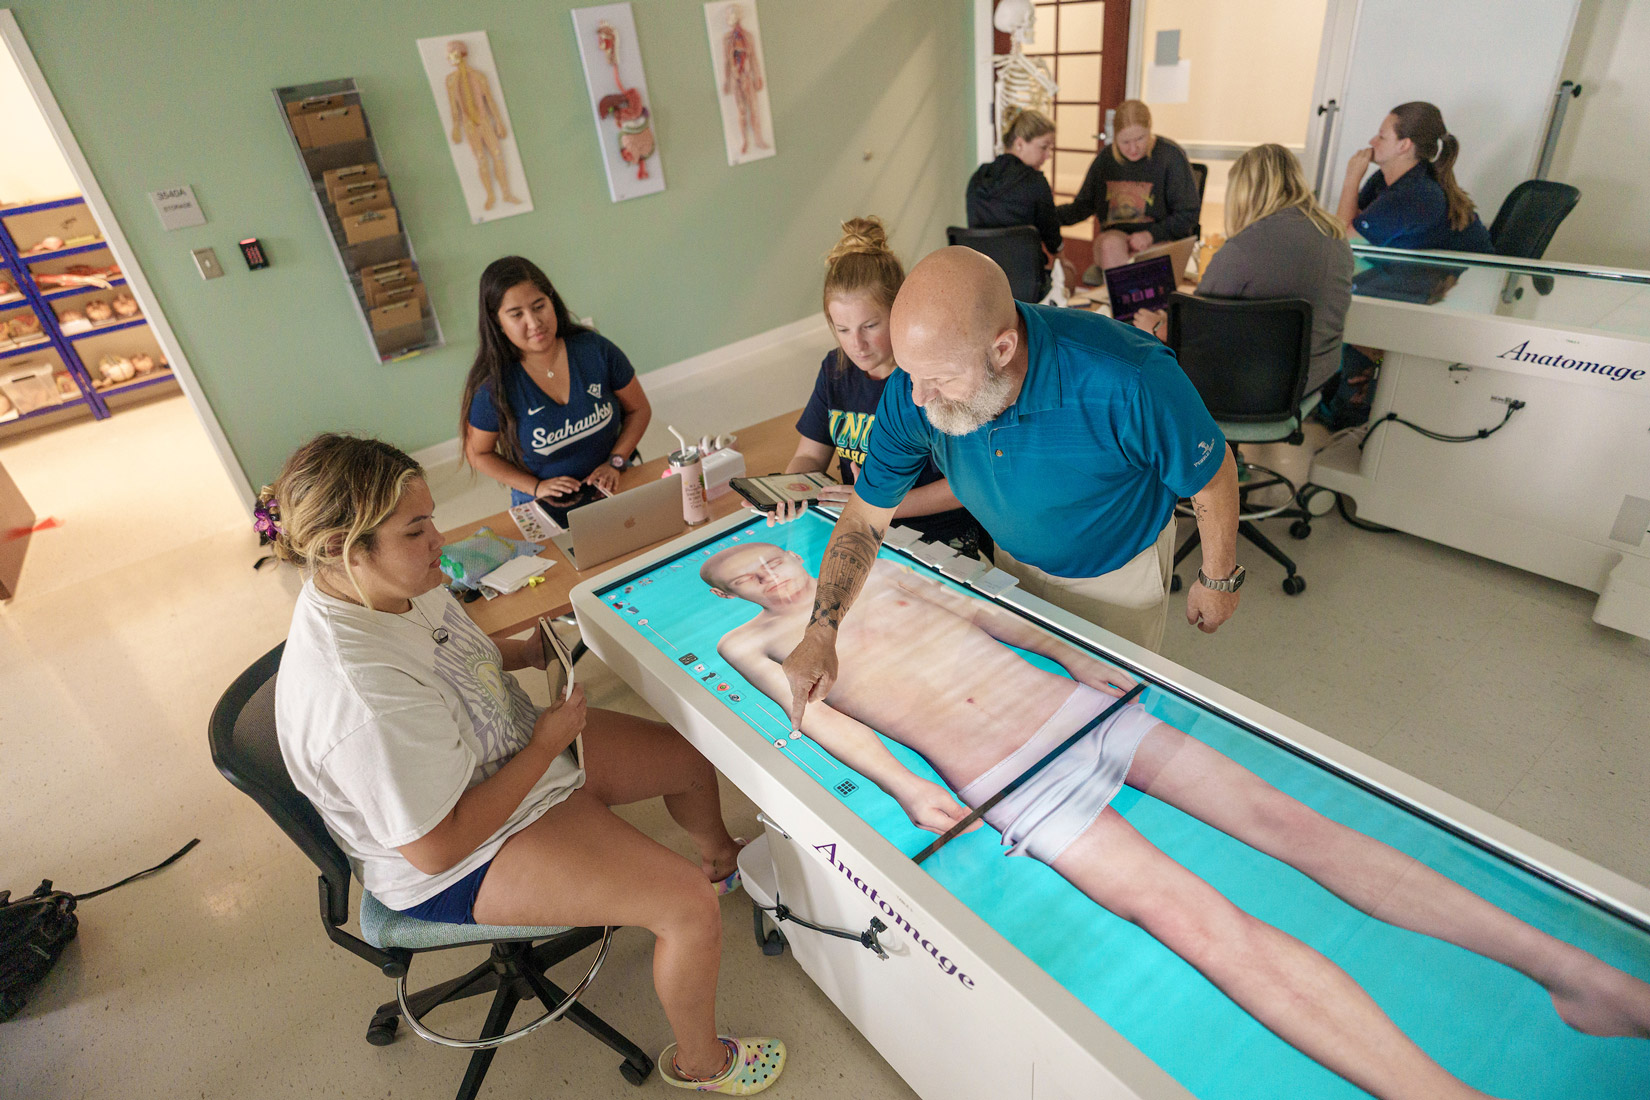 Anatomy students use an Anatomage Table, a 3D visualization and dissection tool. Aided by philanthropic impact, UNCW students will experience high-quality preparation to enhance healthcare within the region.